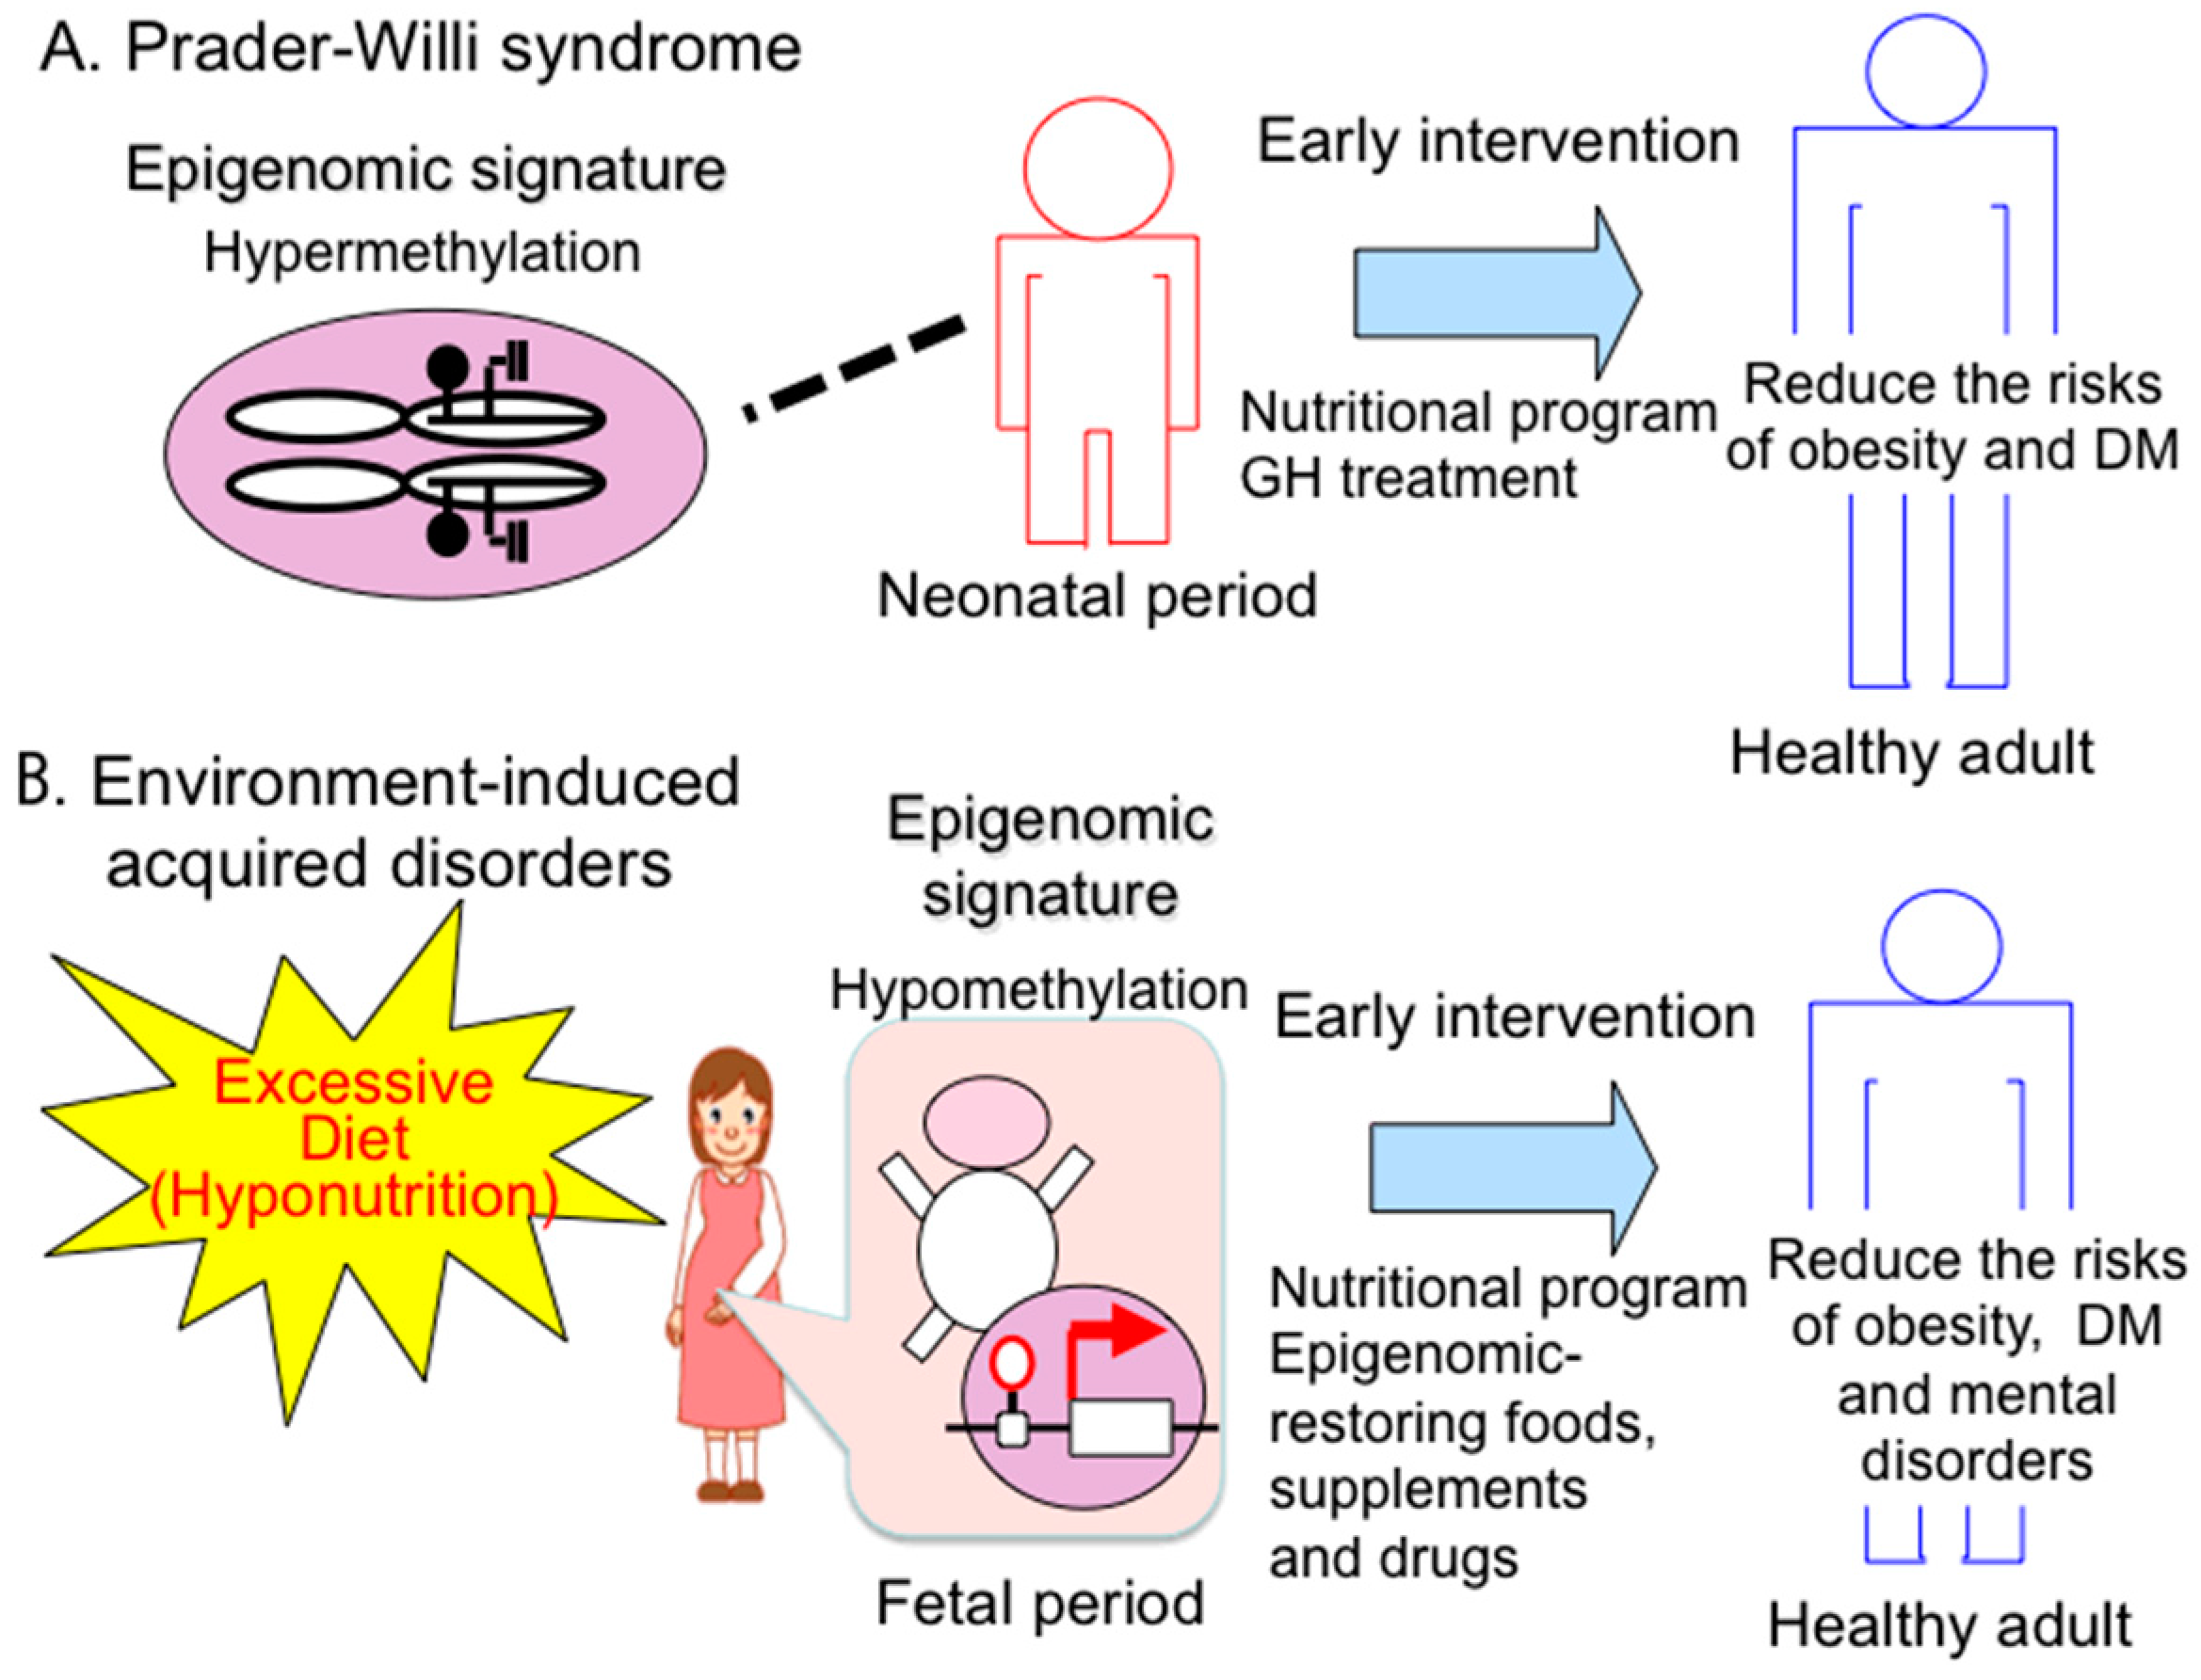 Diseases | Free Full-Text | Prader-Willi Syndrome: The Disease that Opened  up Epigenomic-Based Preemptive Medicine